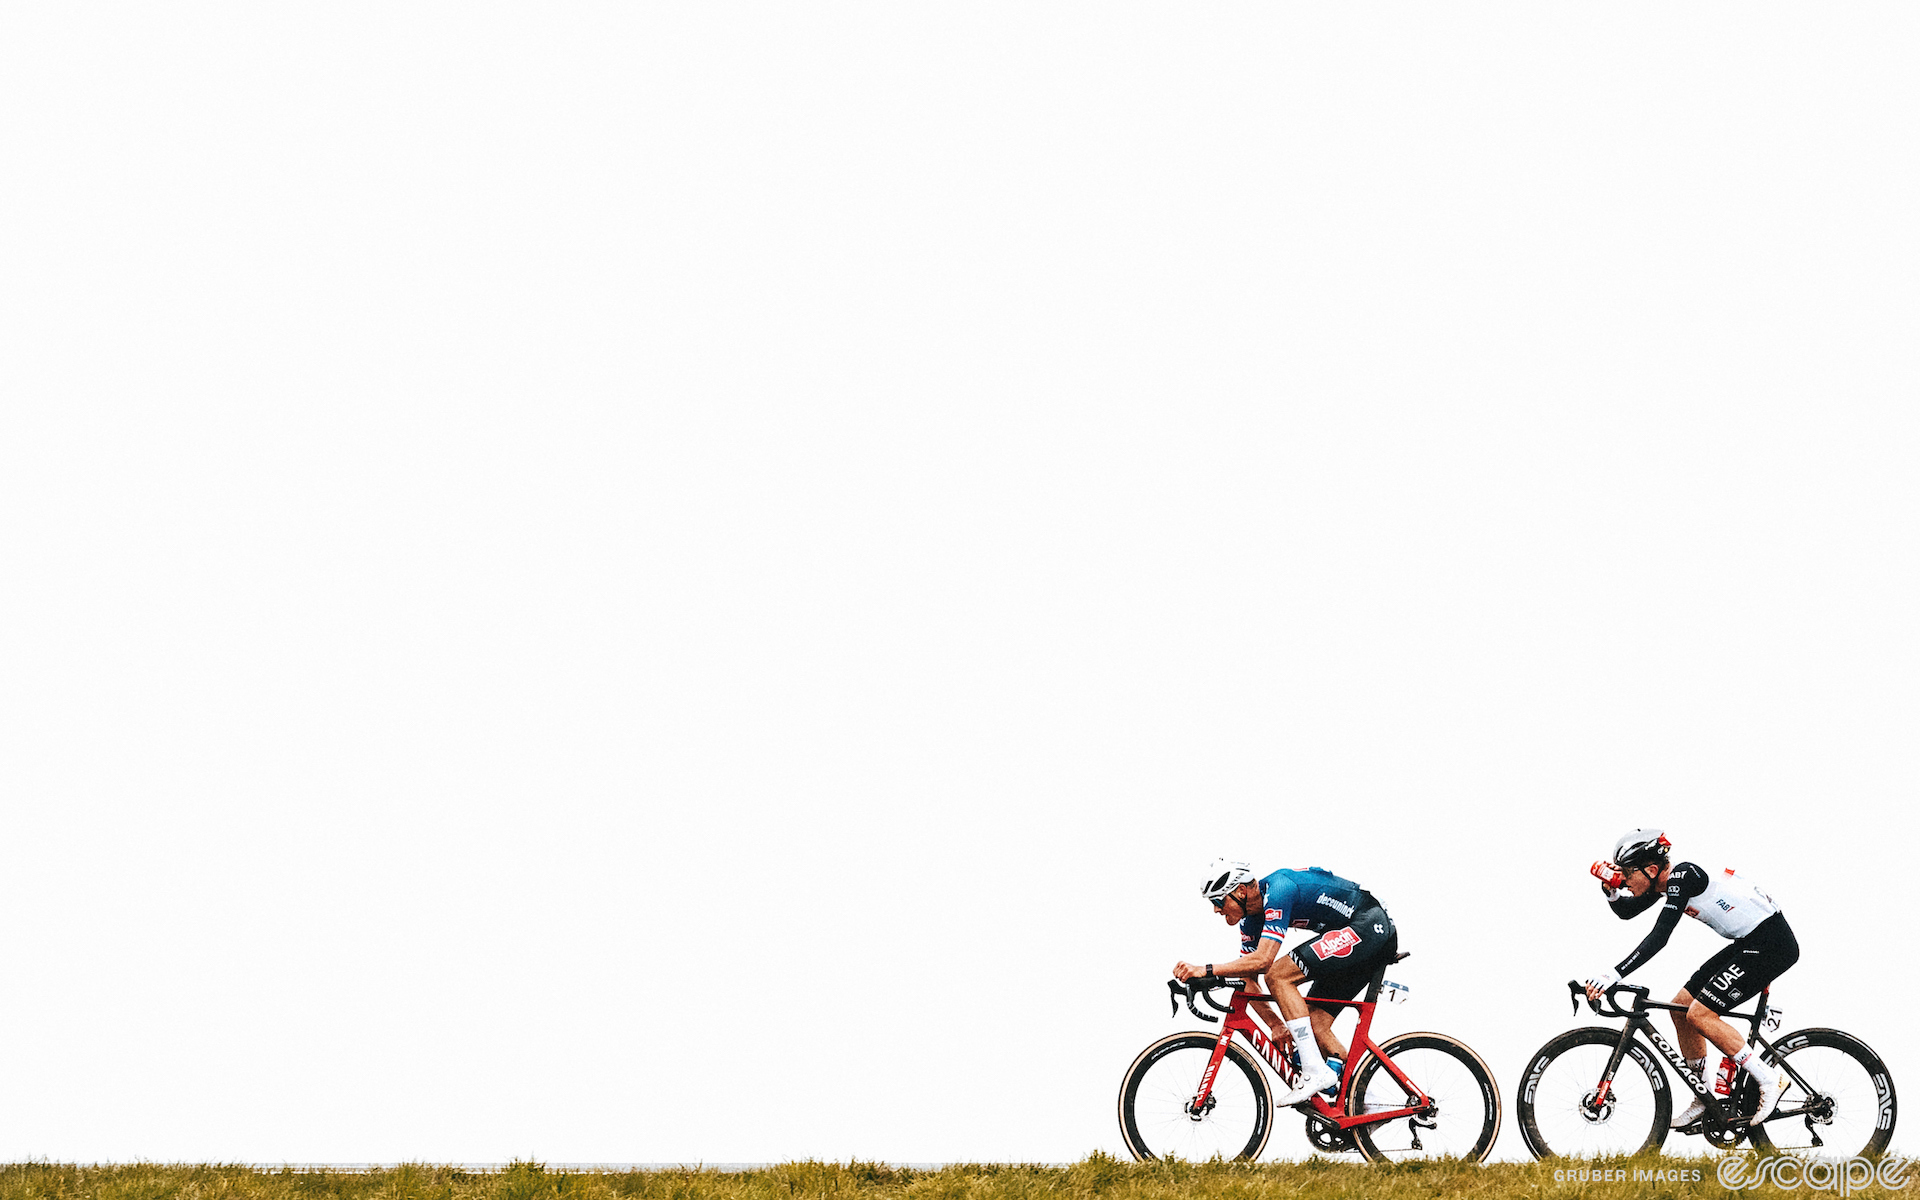 Mathieu van der Poel leads Tadej Pogačar in the 2023 Tour of Flanders. They're the only riders in view, framed from the side with a wide shot. A grassy field just peeks out of the bottom edge of the frame and the sky is blown out in white clouds for a gritty contrast.